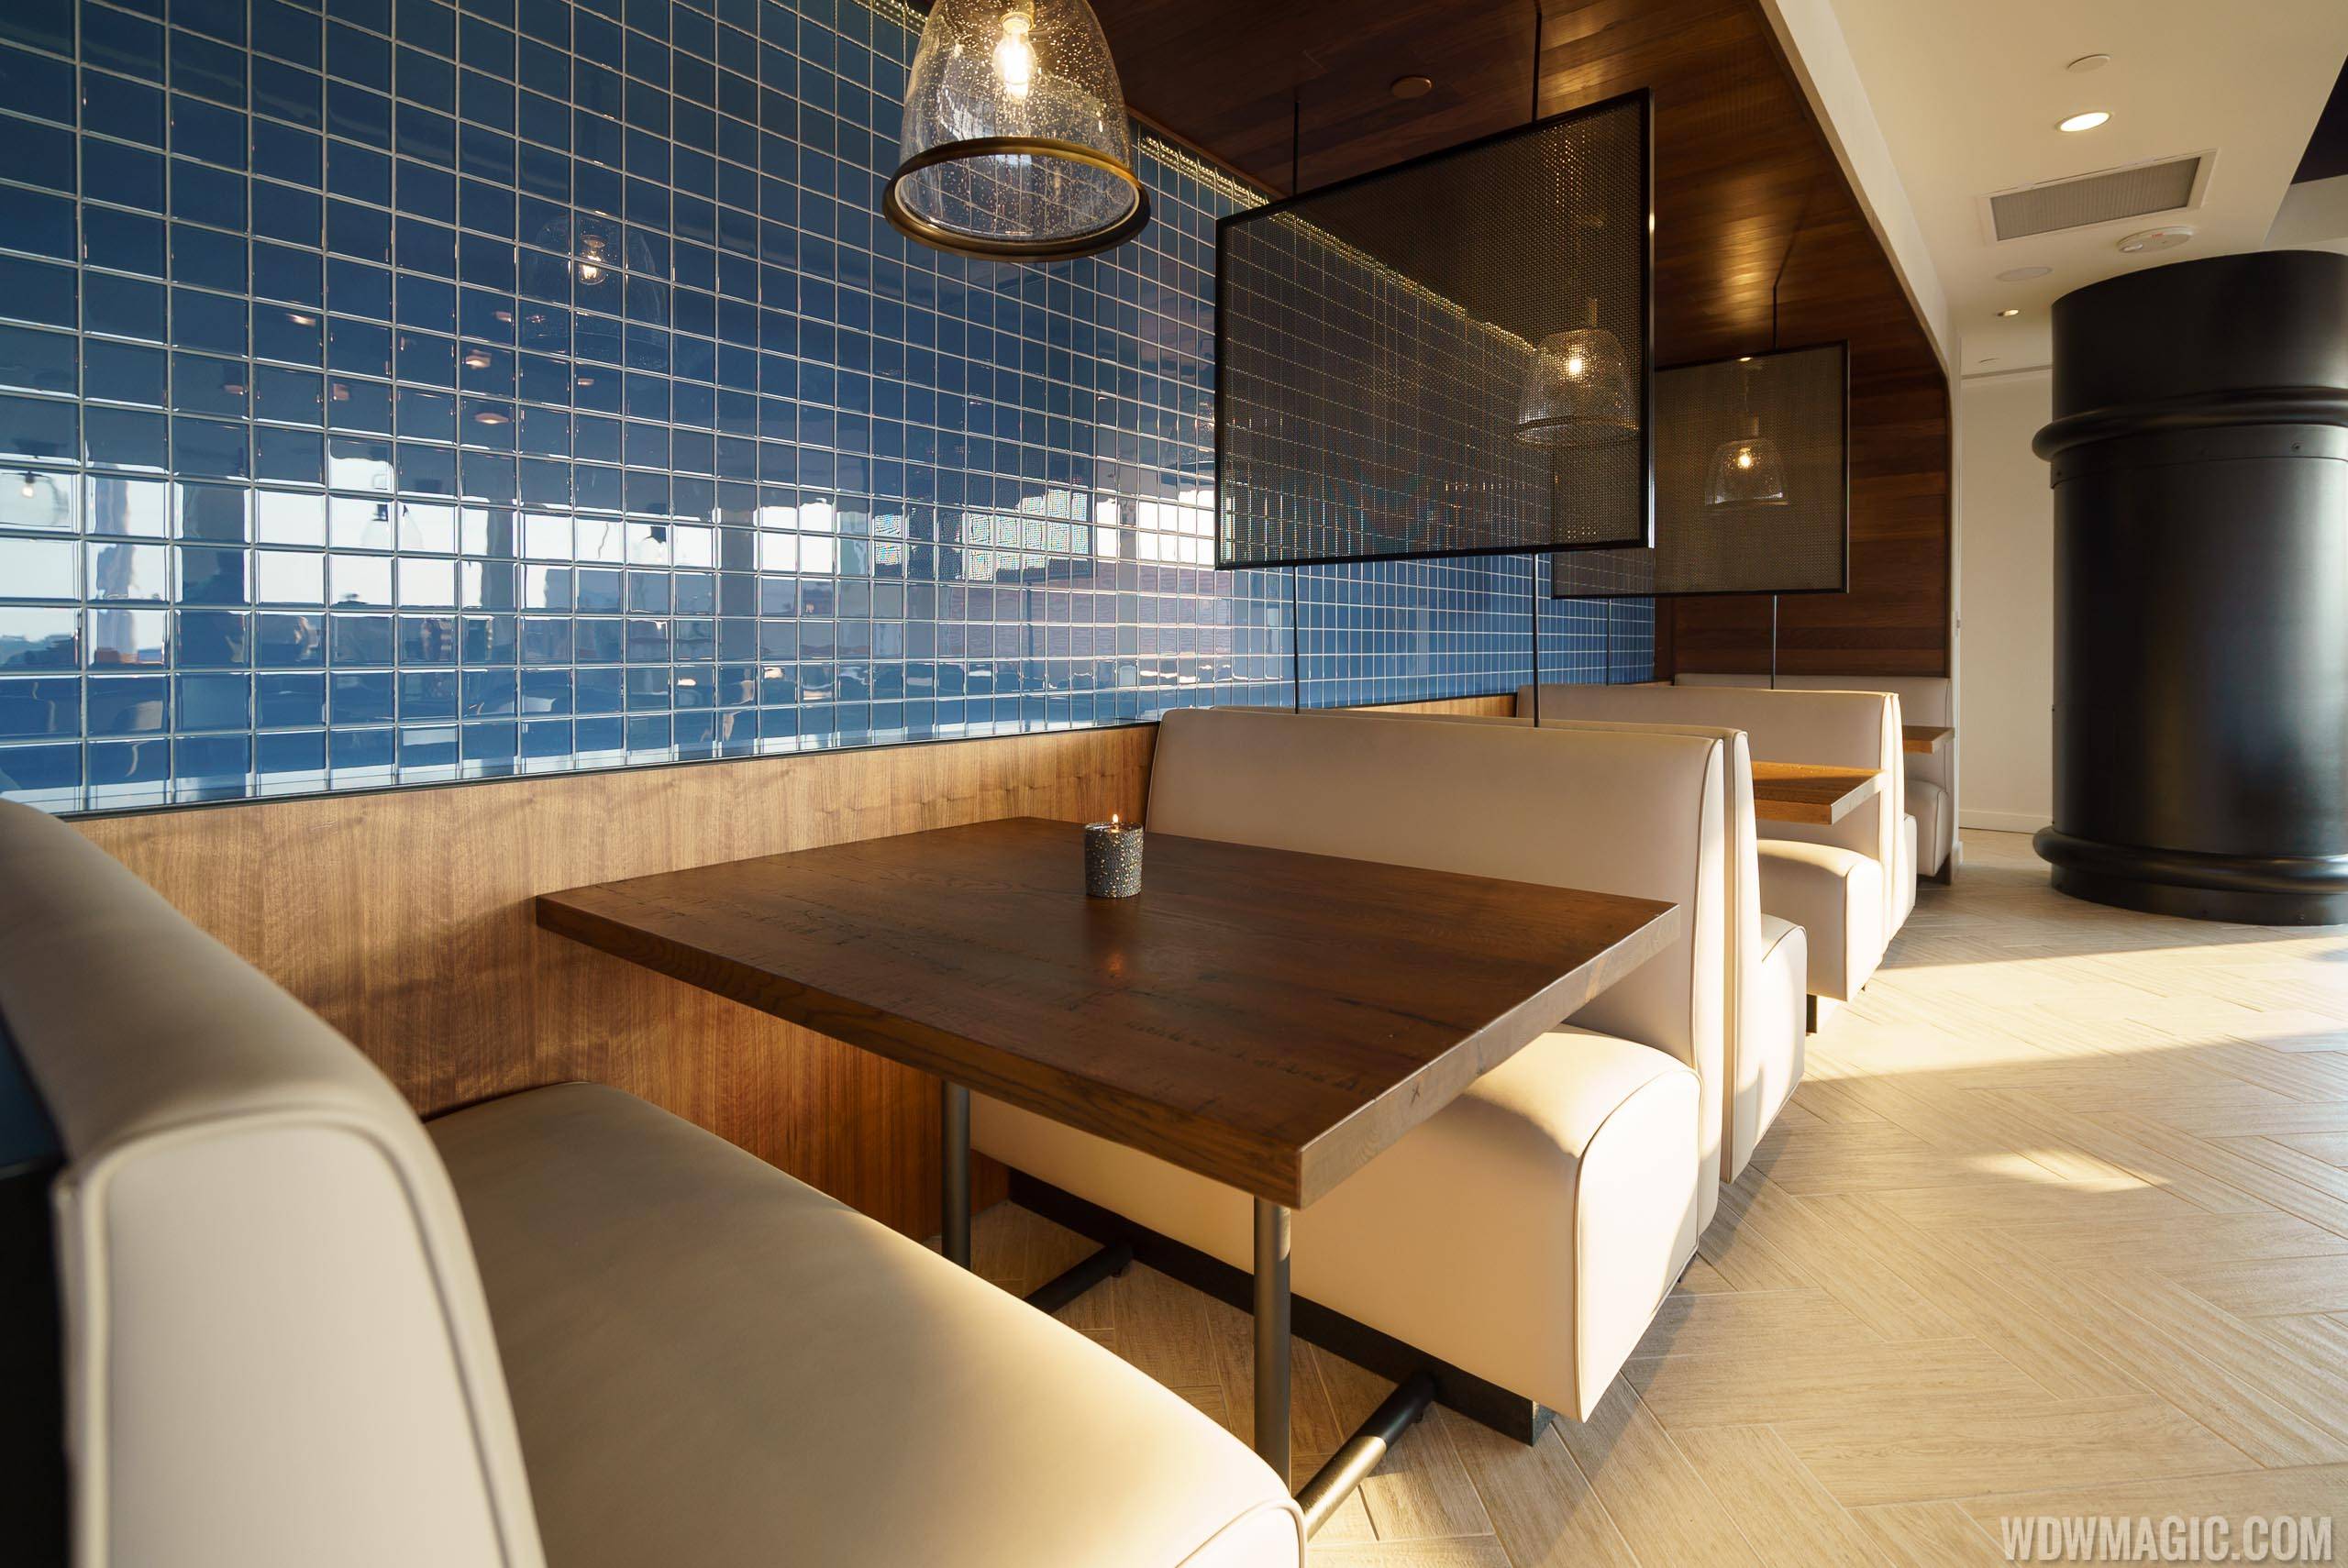 Paddlefish - Mid-deck bow dining room booths